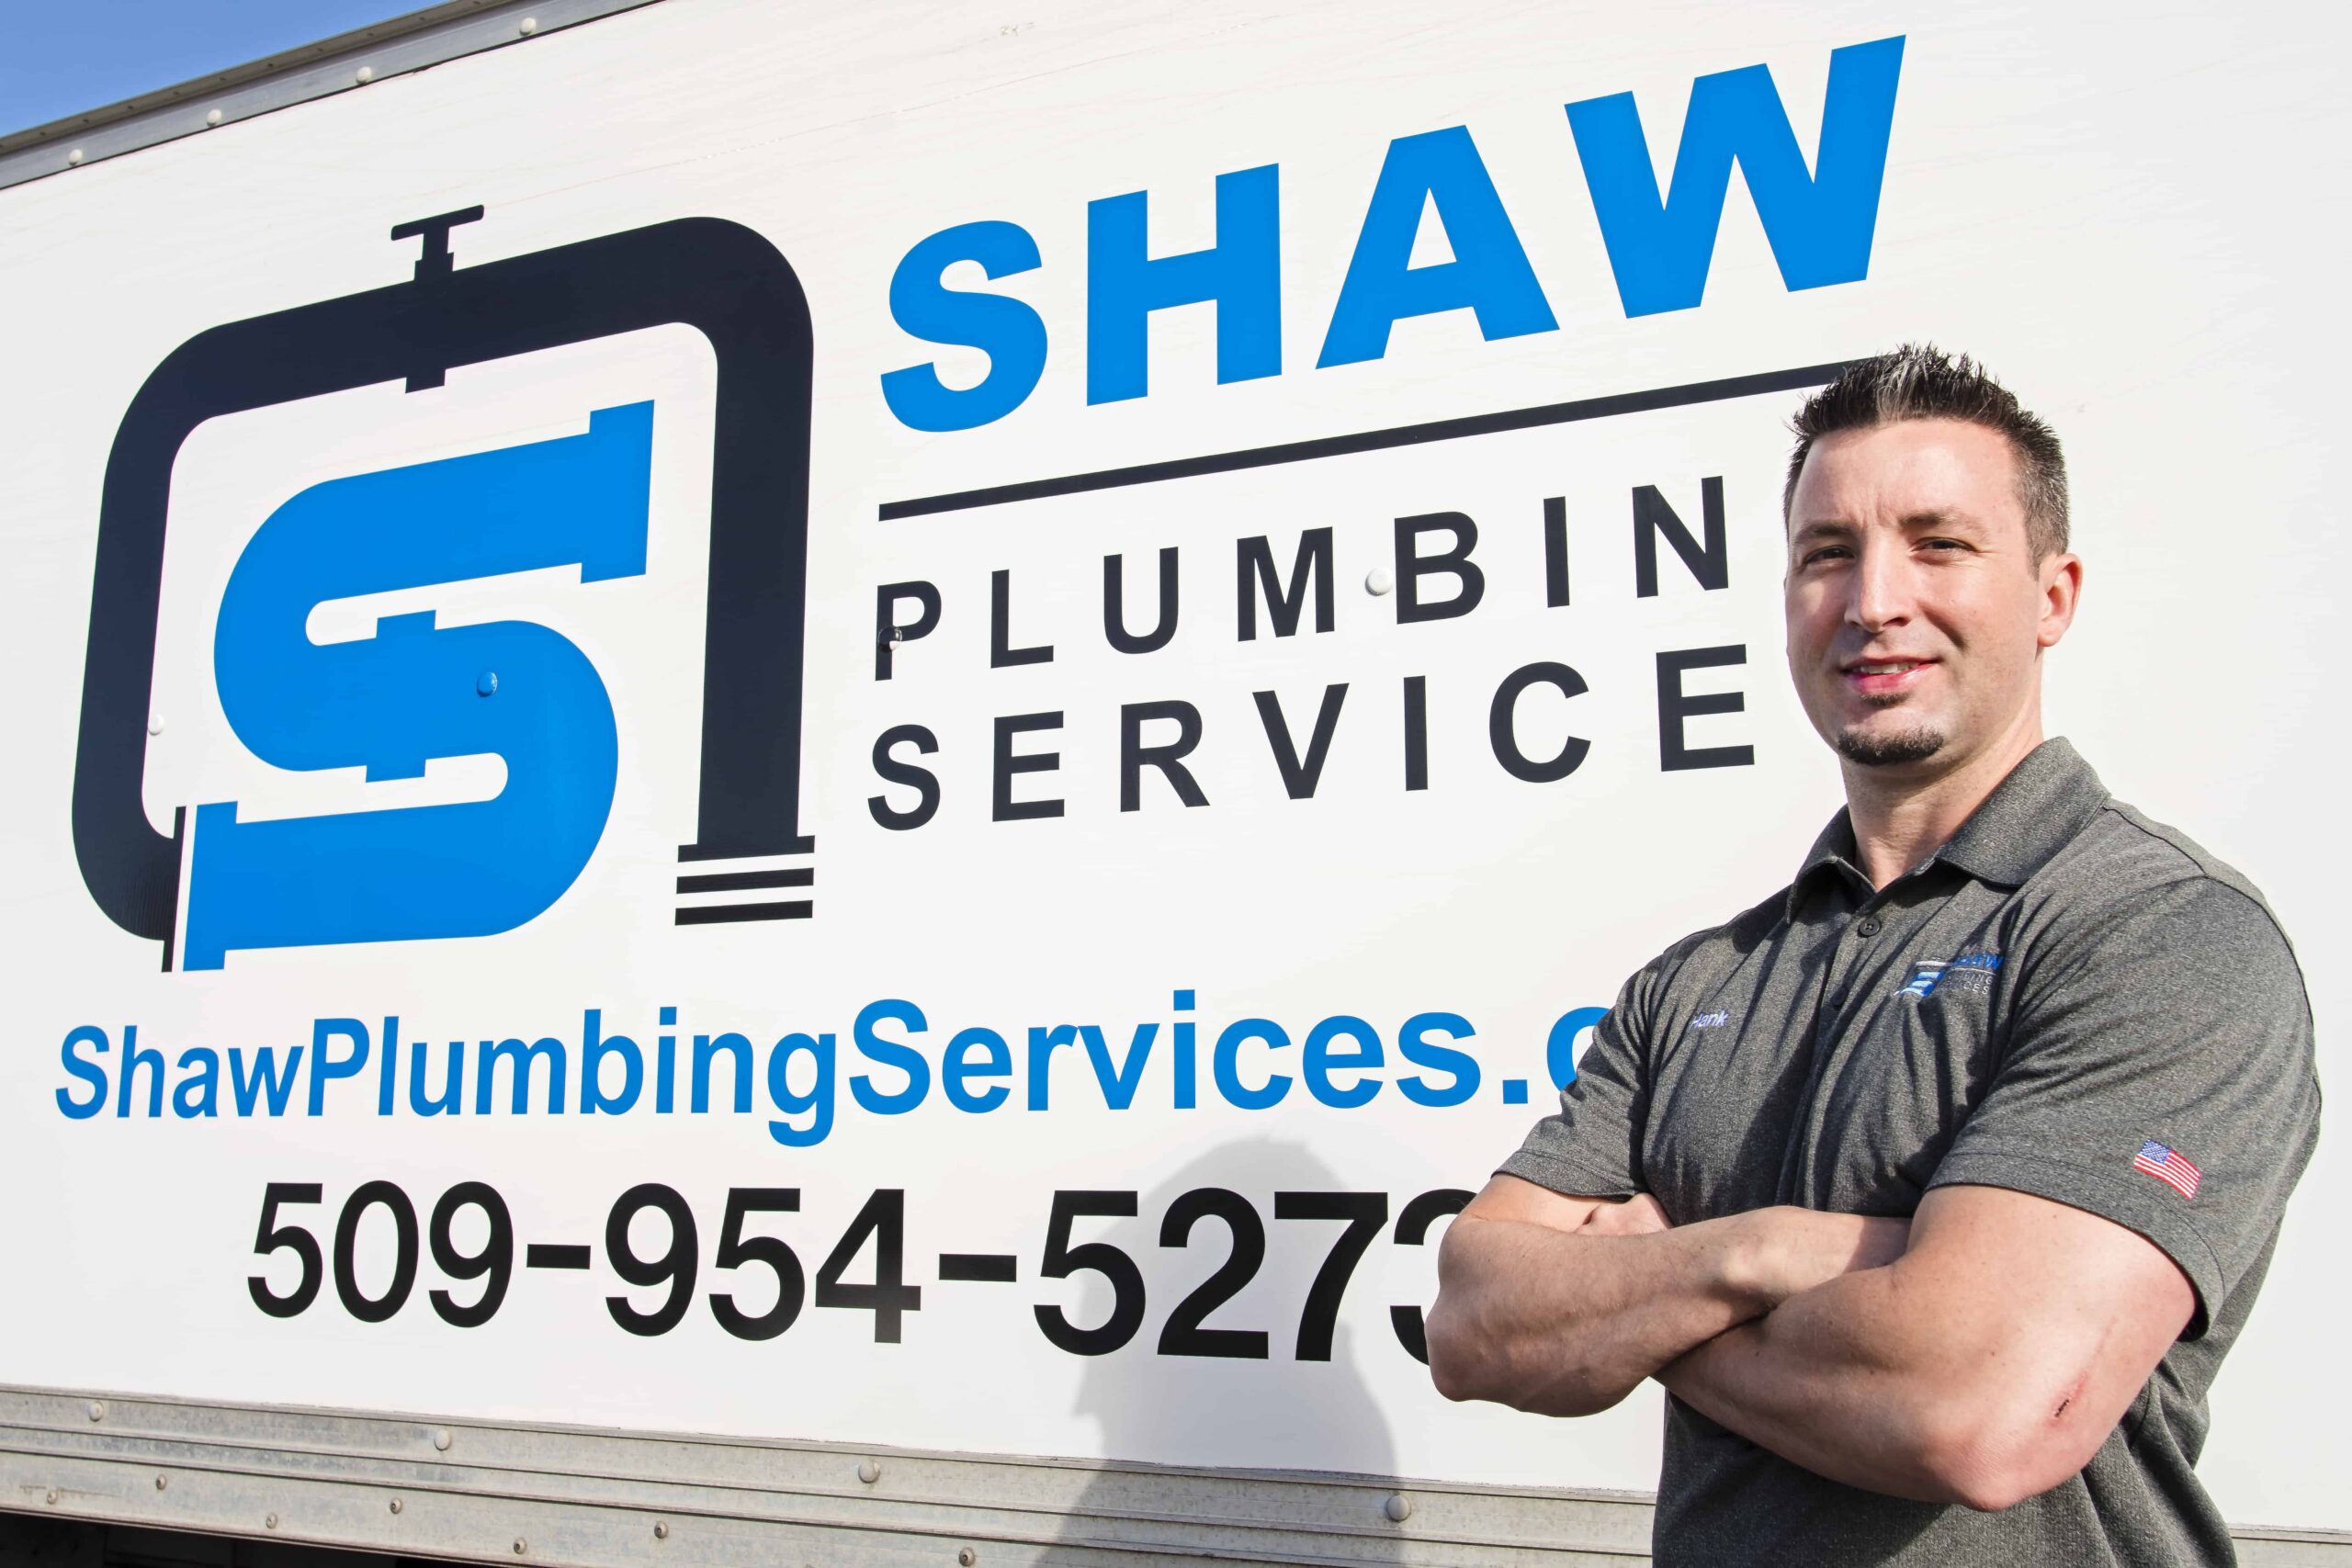 Hank from Shaw Plumbing Services